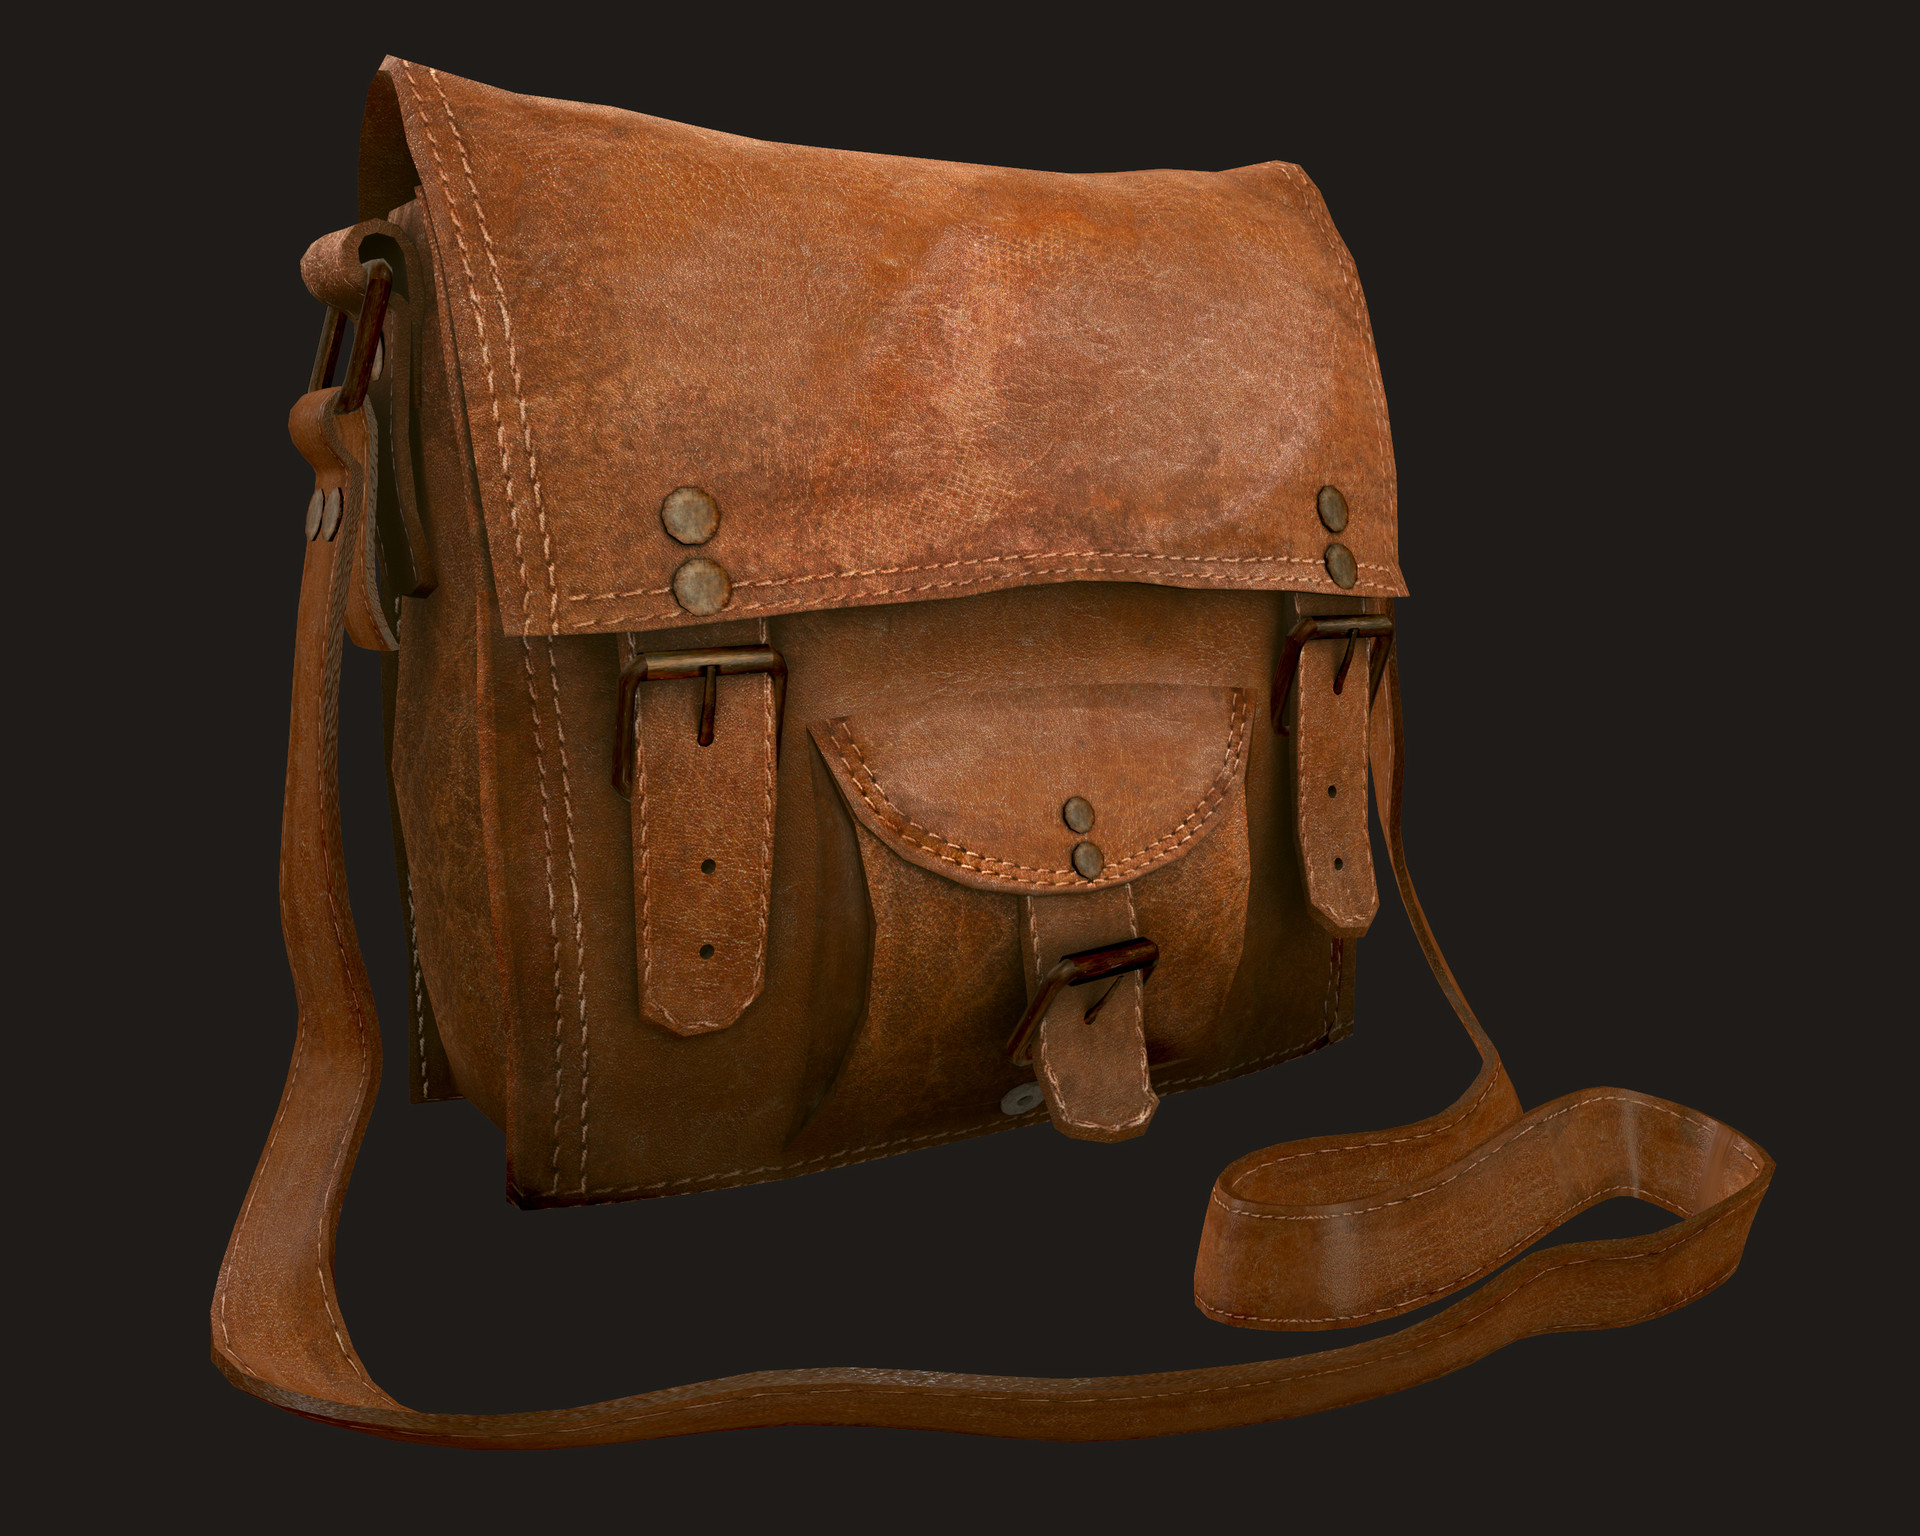 ArtStation - Old Leather Book With Animation